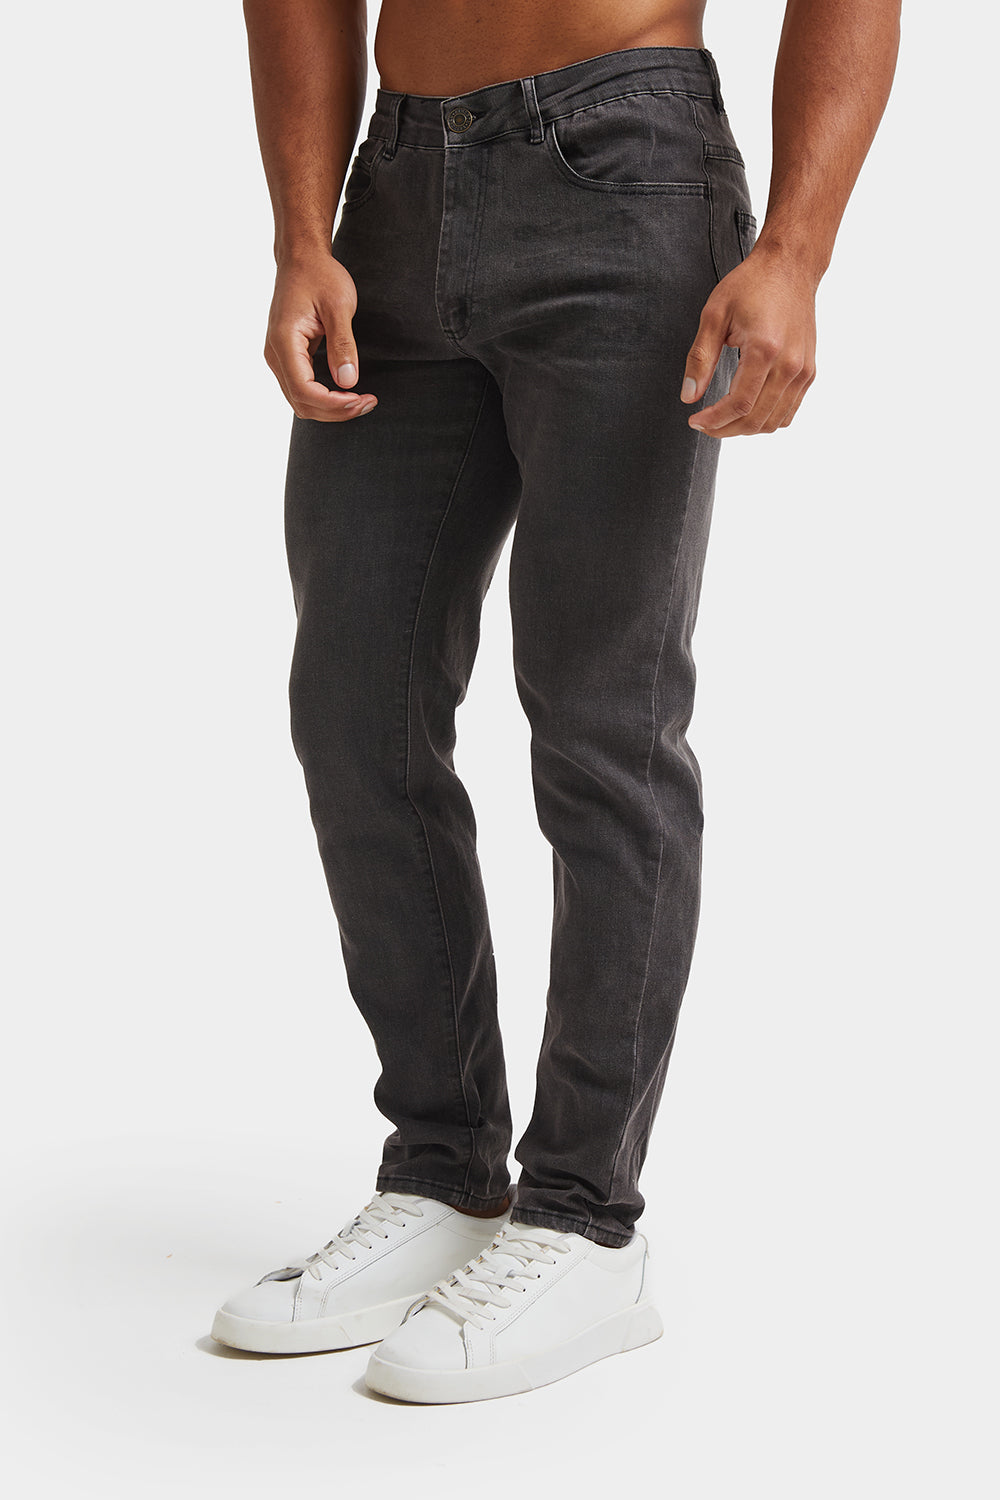 ATHLETE USA in - Grey - Fit Dark Jeans Athletic TAILORED